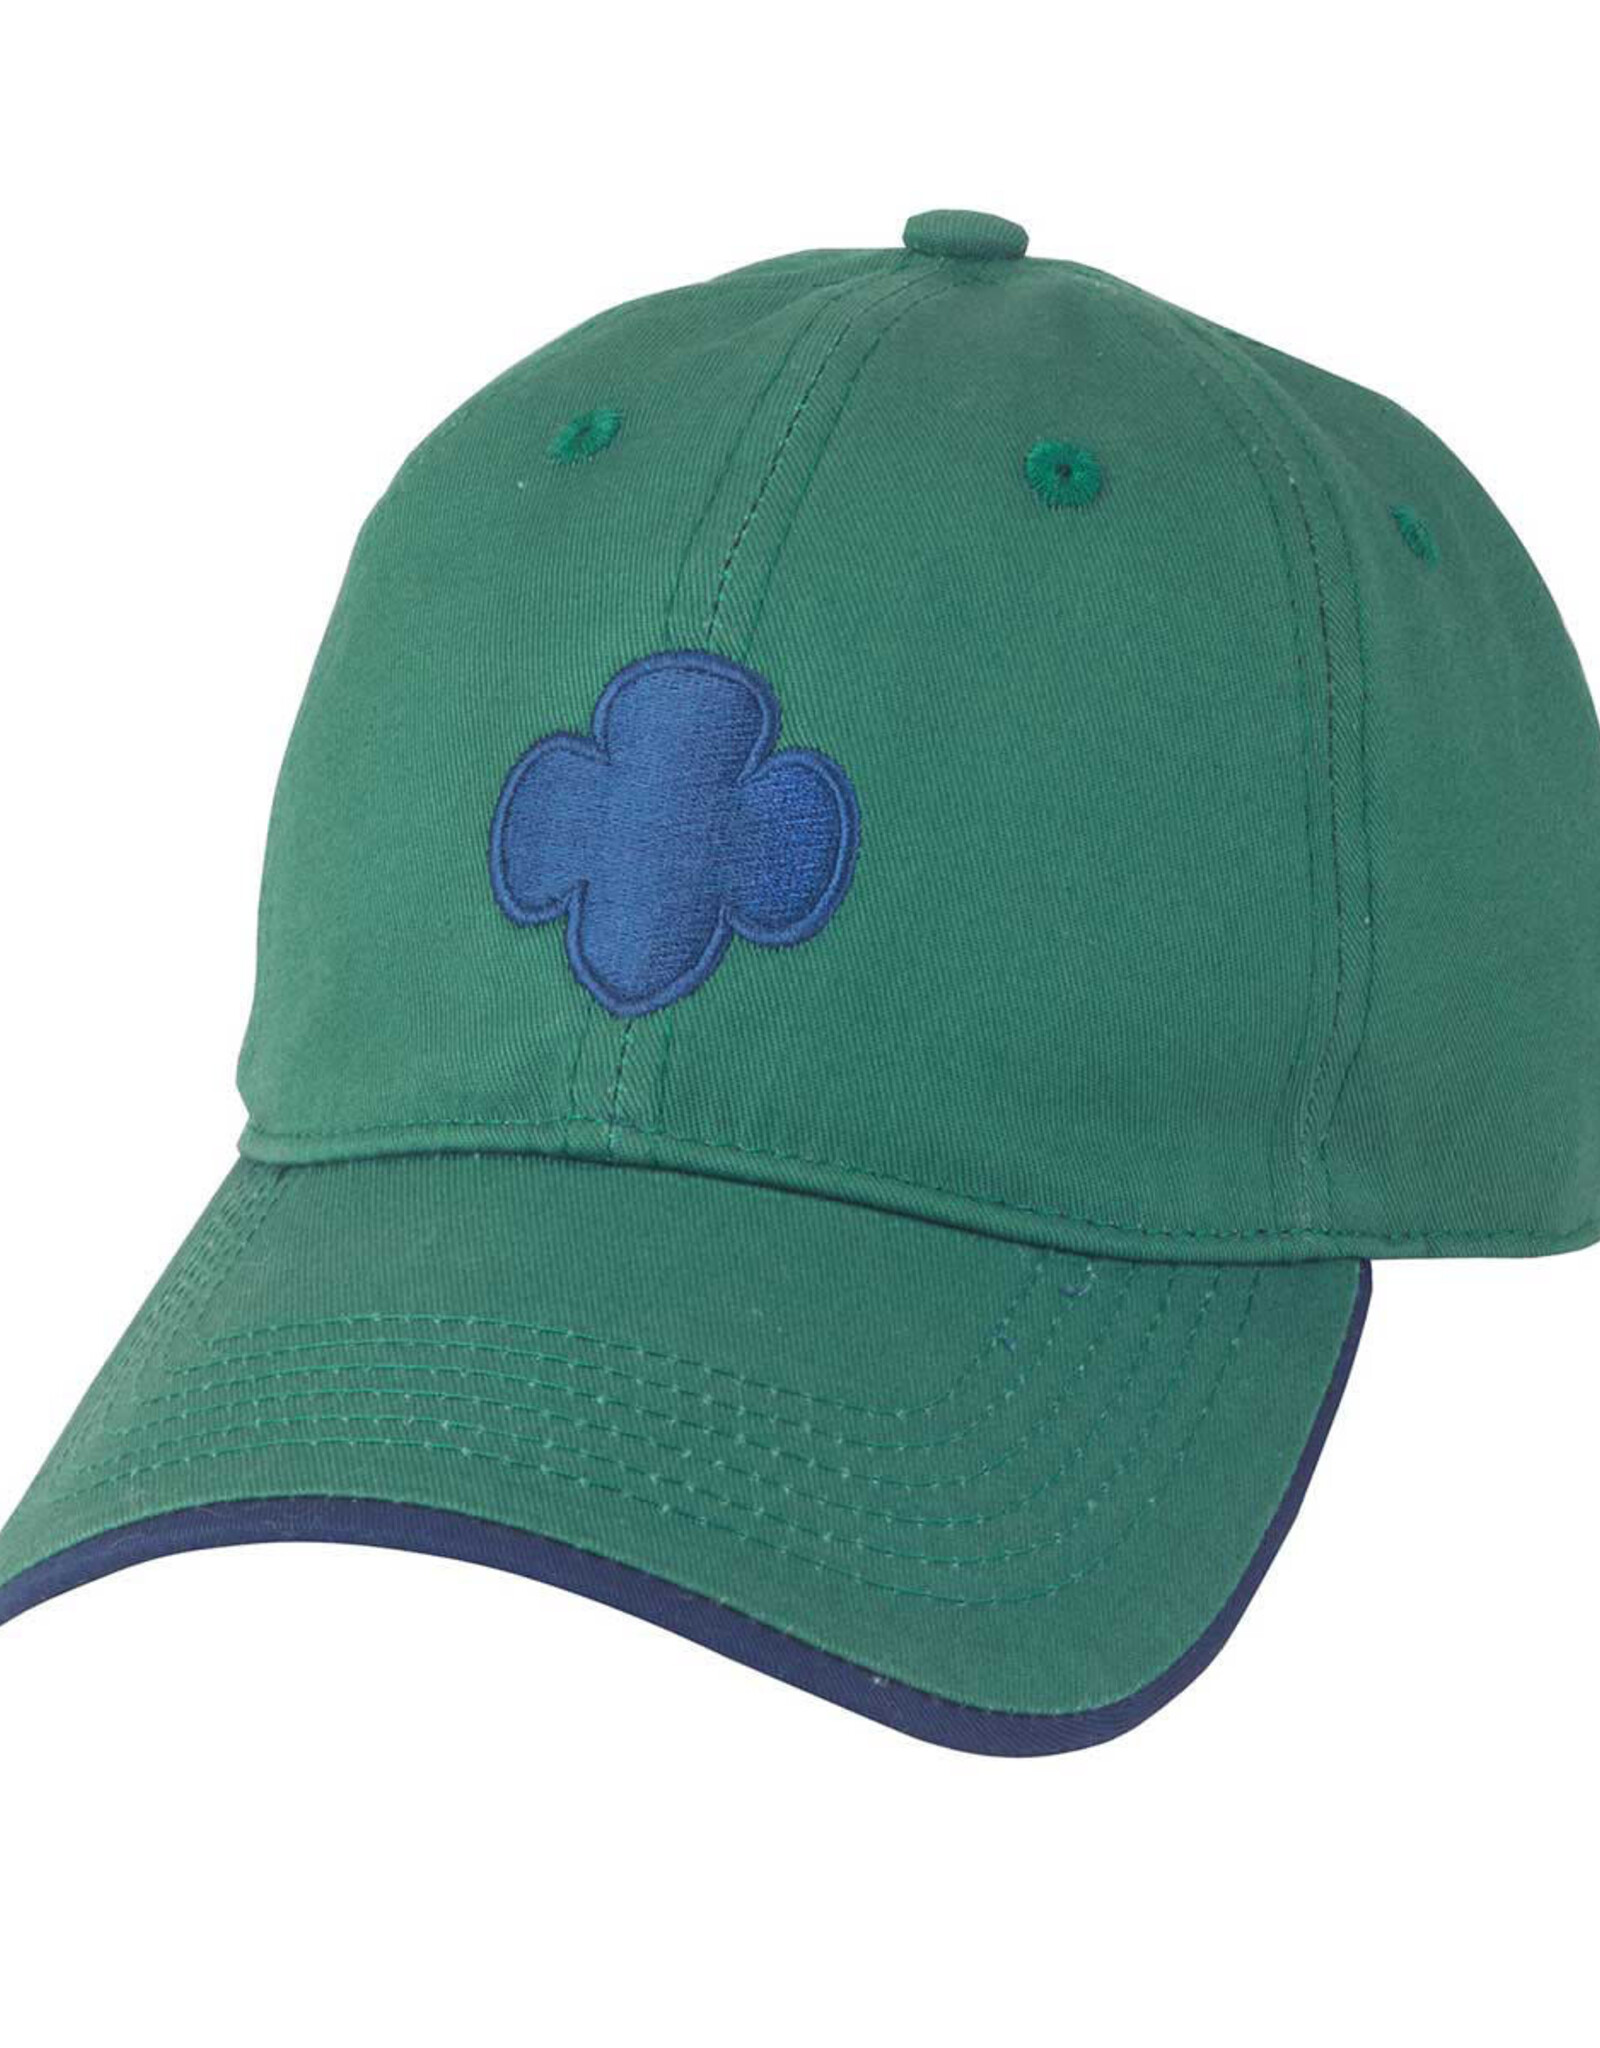 GIRL SCOUTS OF THE USA Official Adult Baseball Cap Hat